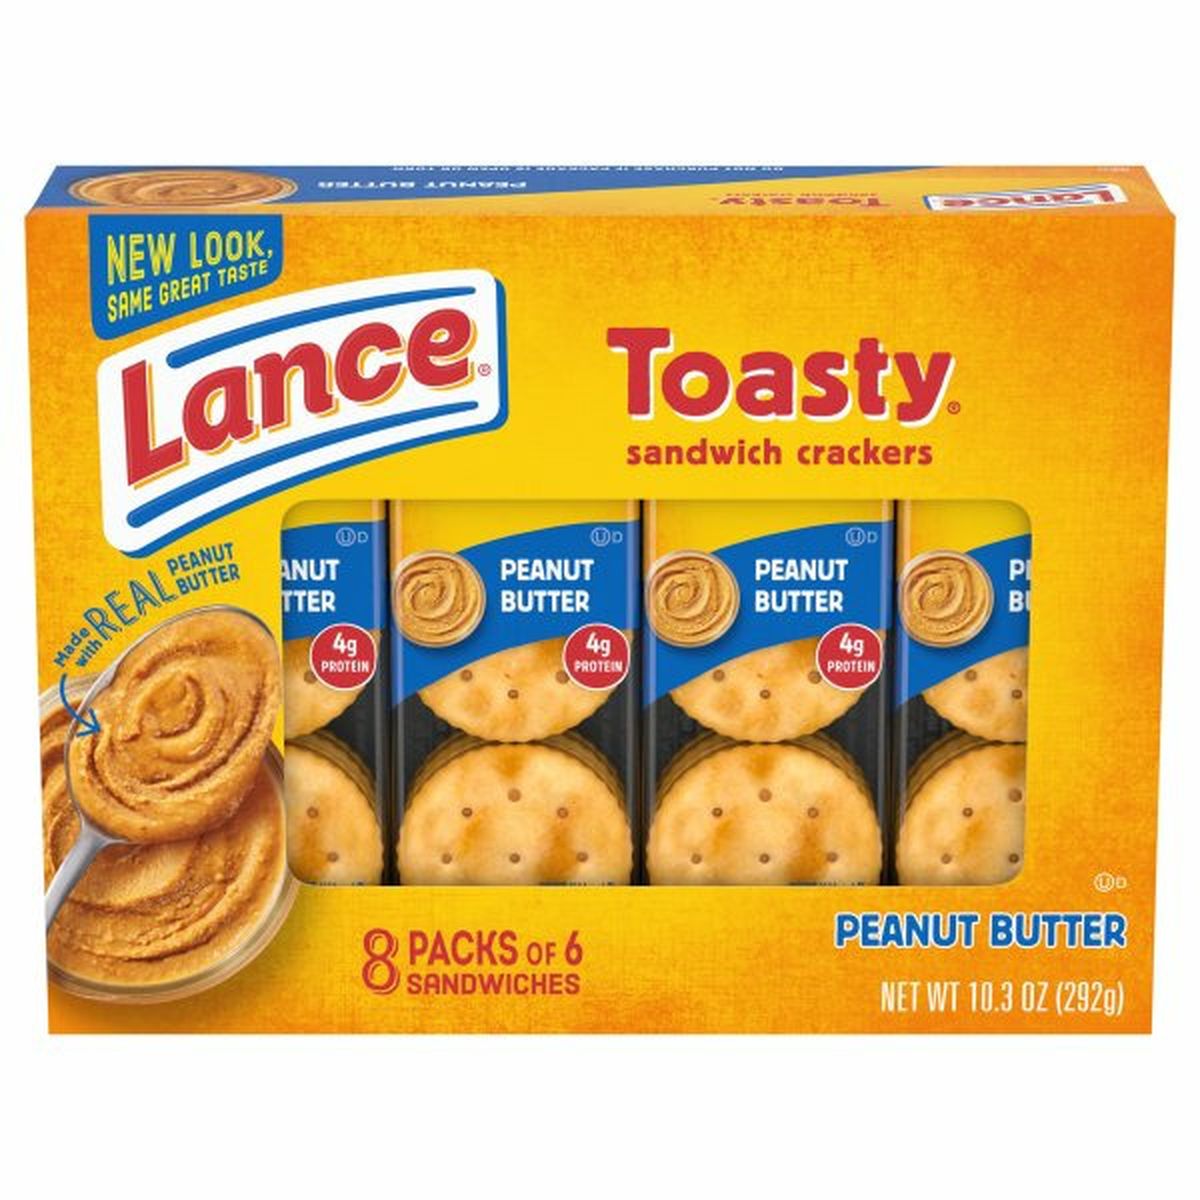 Calories in Lances Toasty Sandwich Crackers, Peanut Butter, 8 Packs